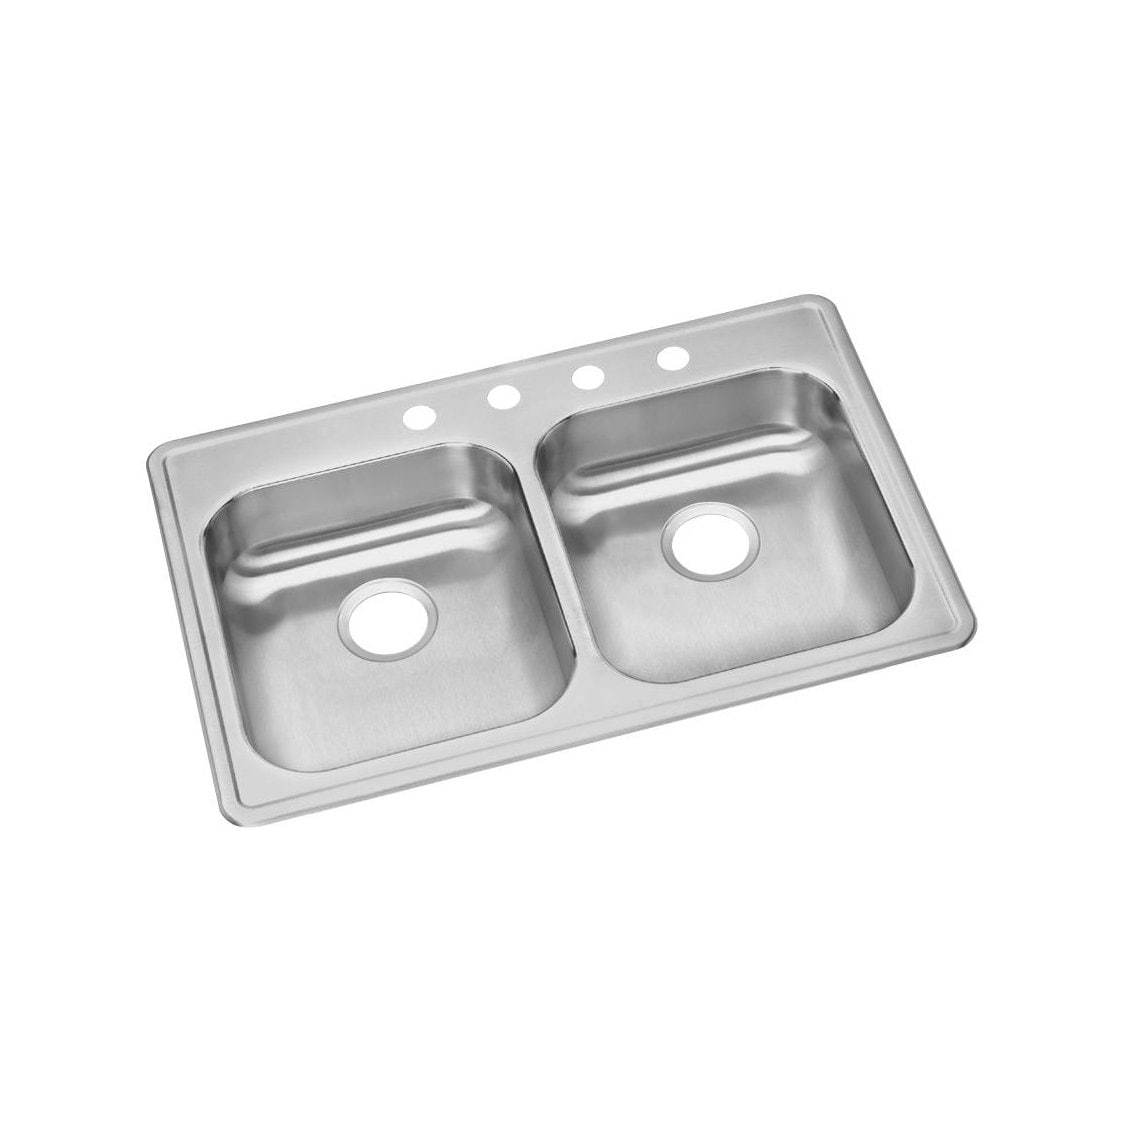 33 X 21 Three Hole Double Bowl Stainless Steel SINK ADA